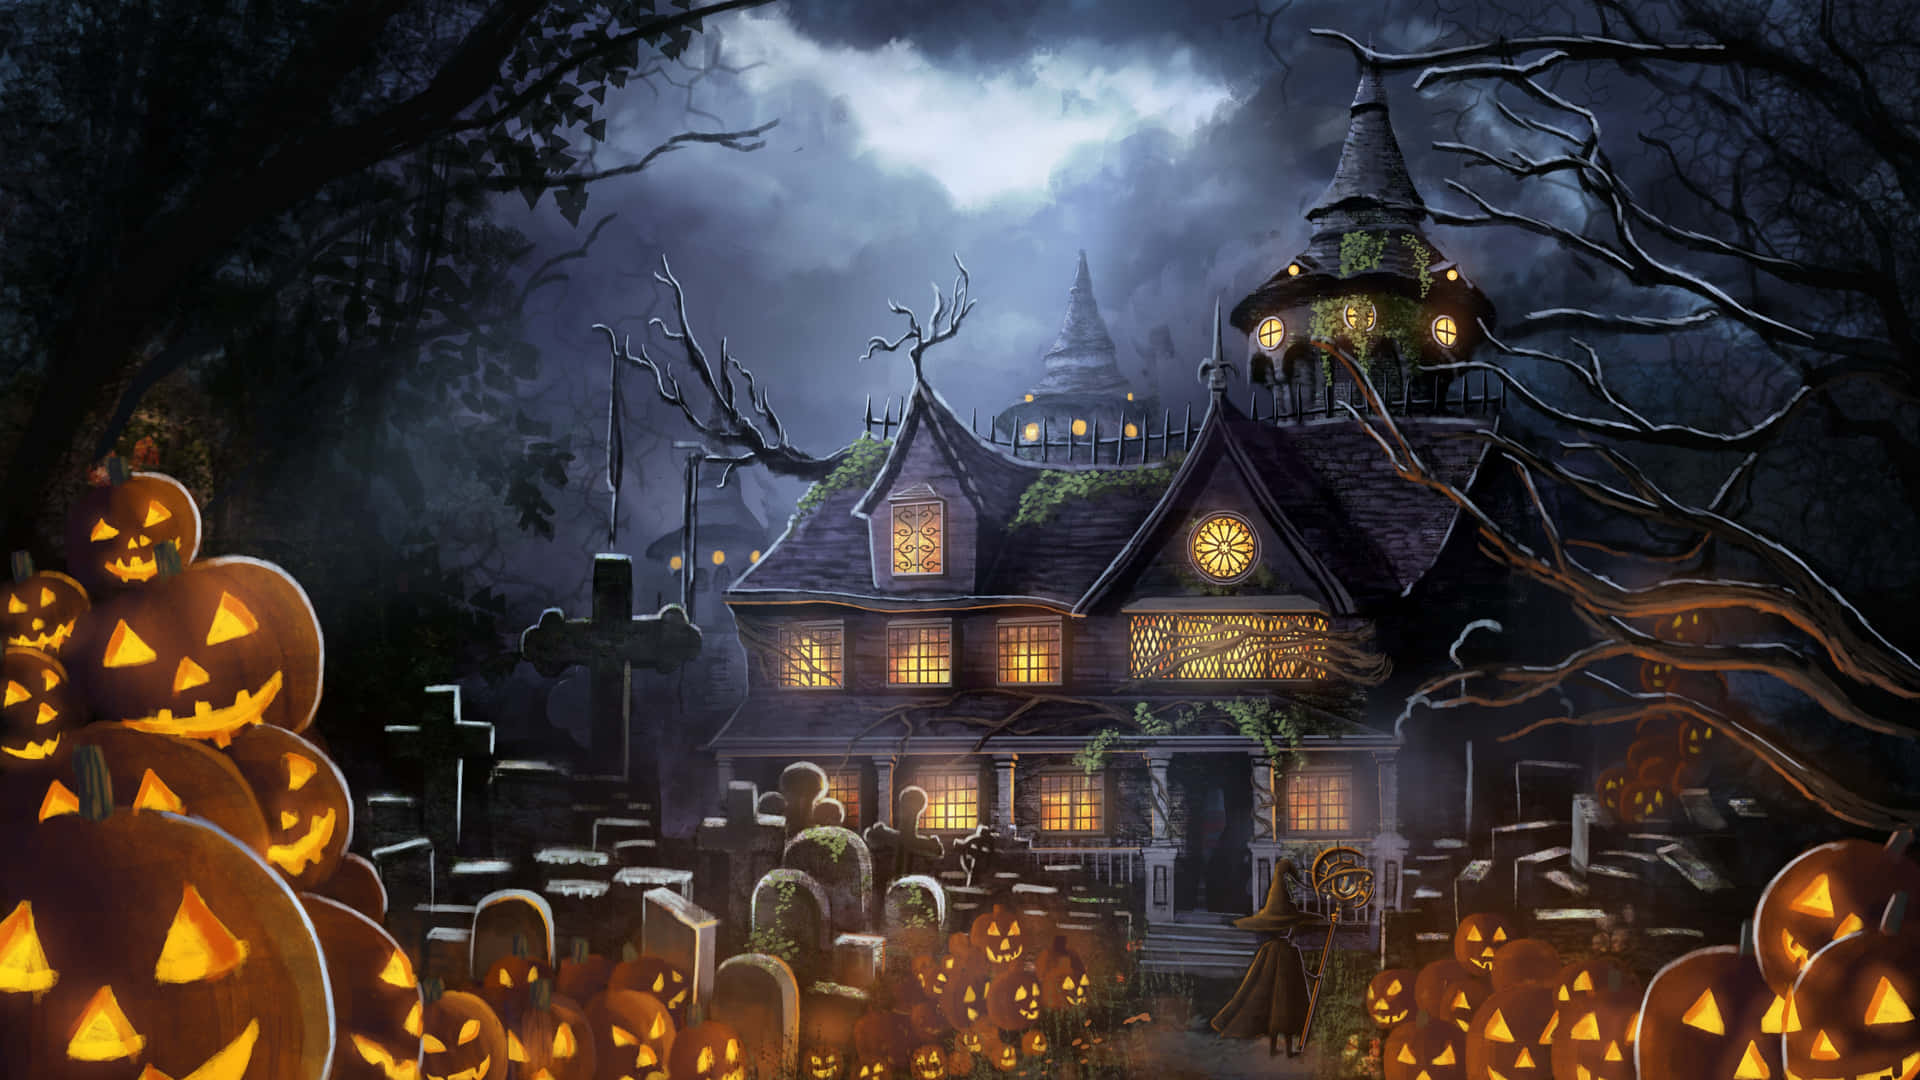 Zoom into the next dimension with this spooky virtual background